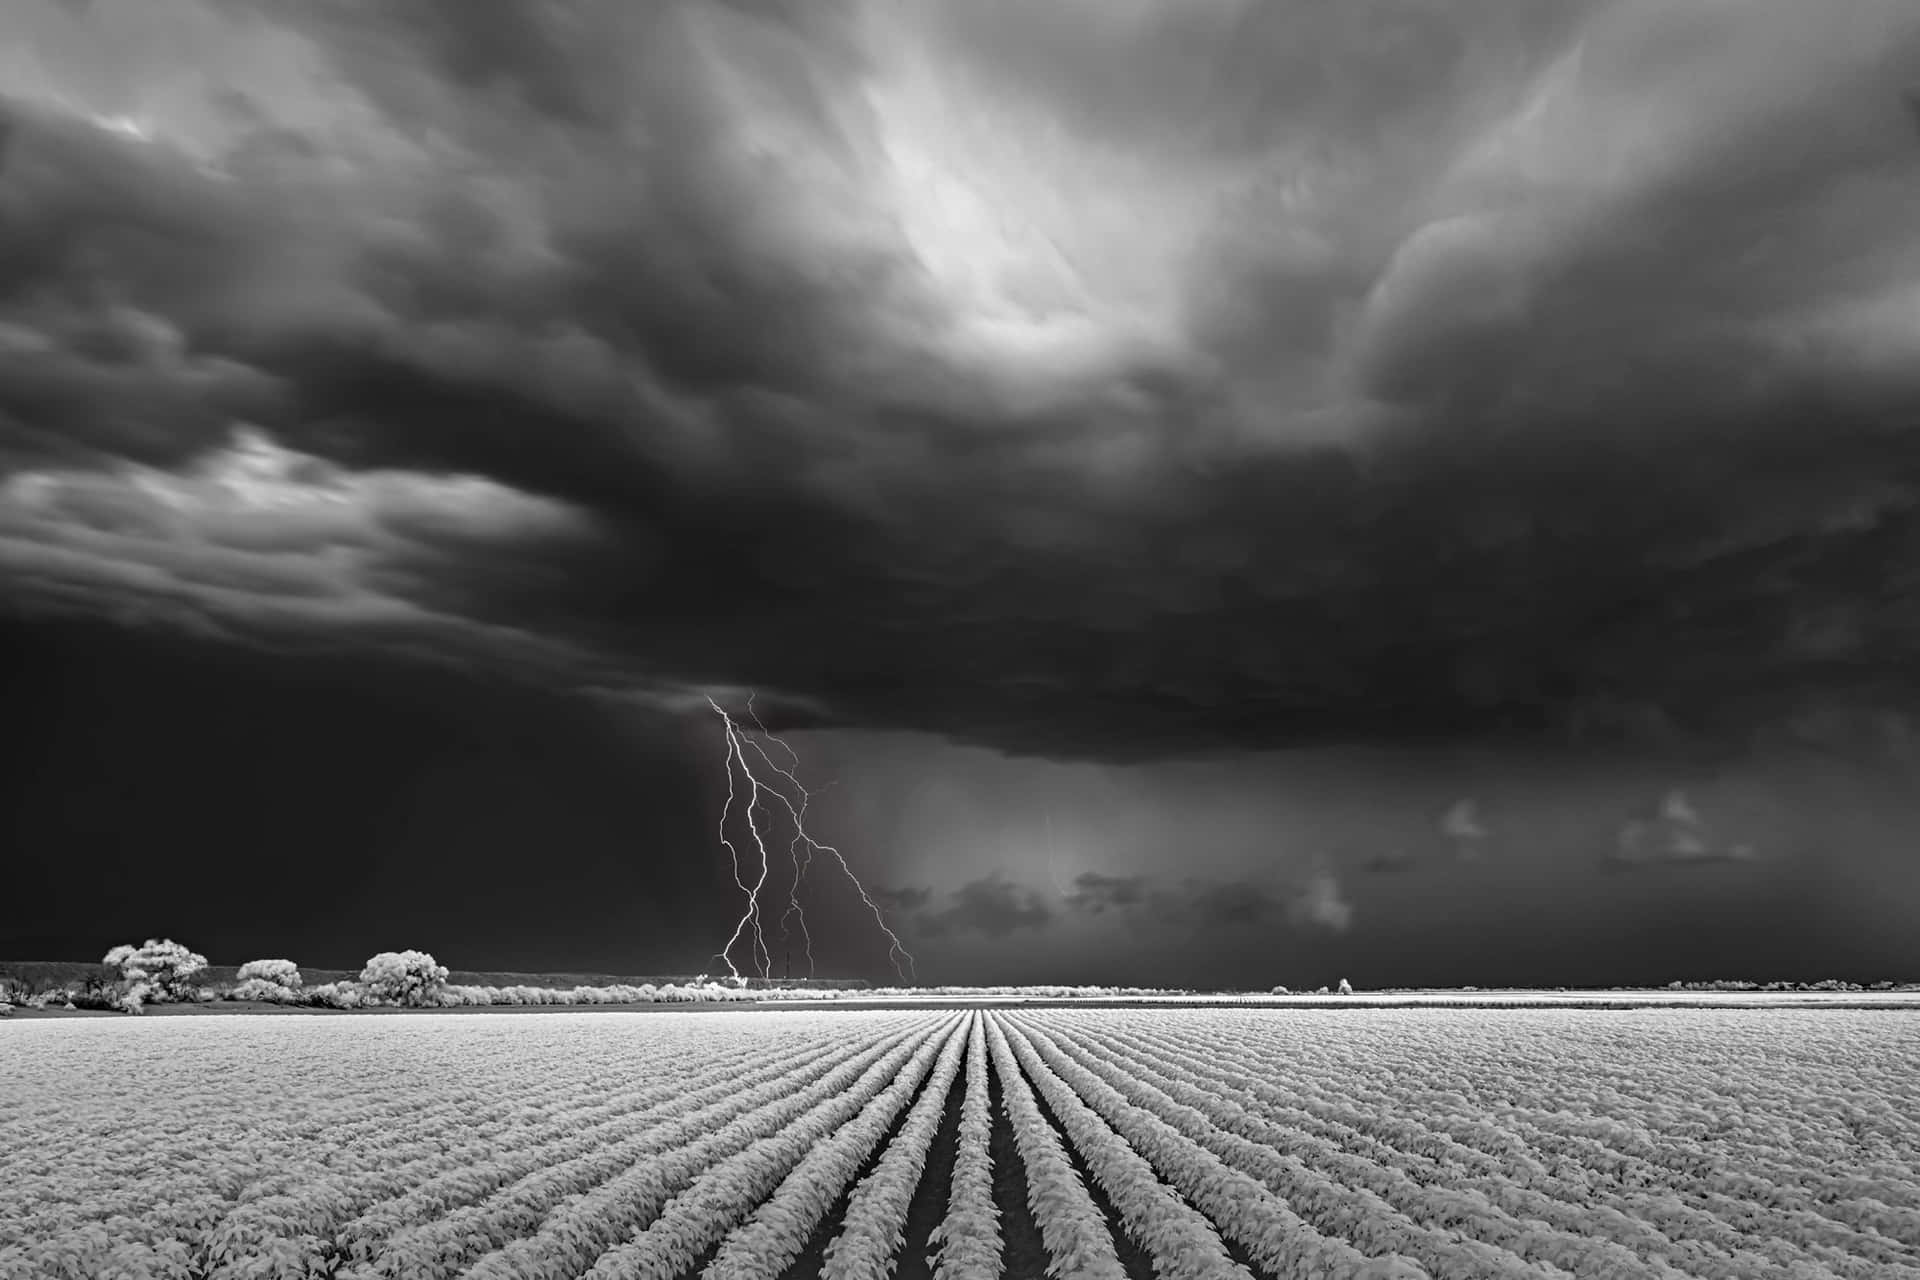 A Powerful Black and White Storm Wallpaper